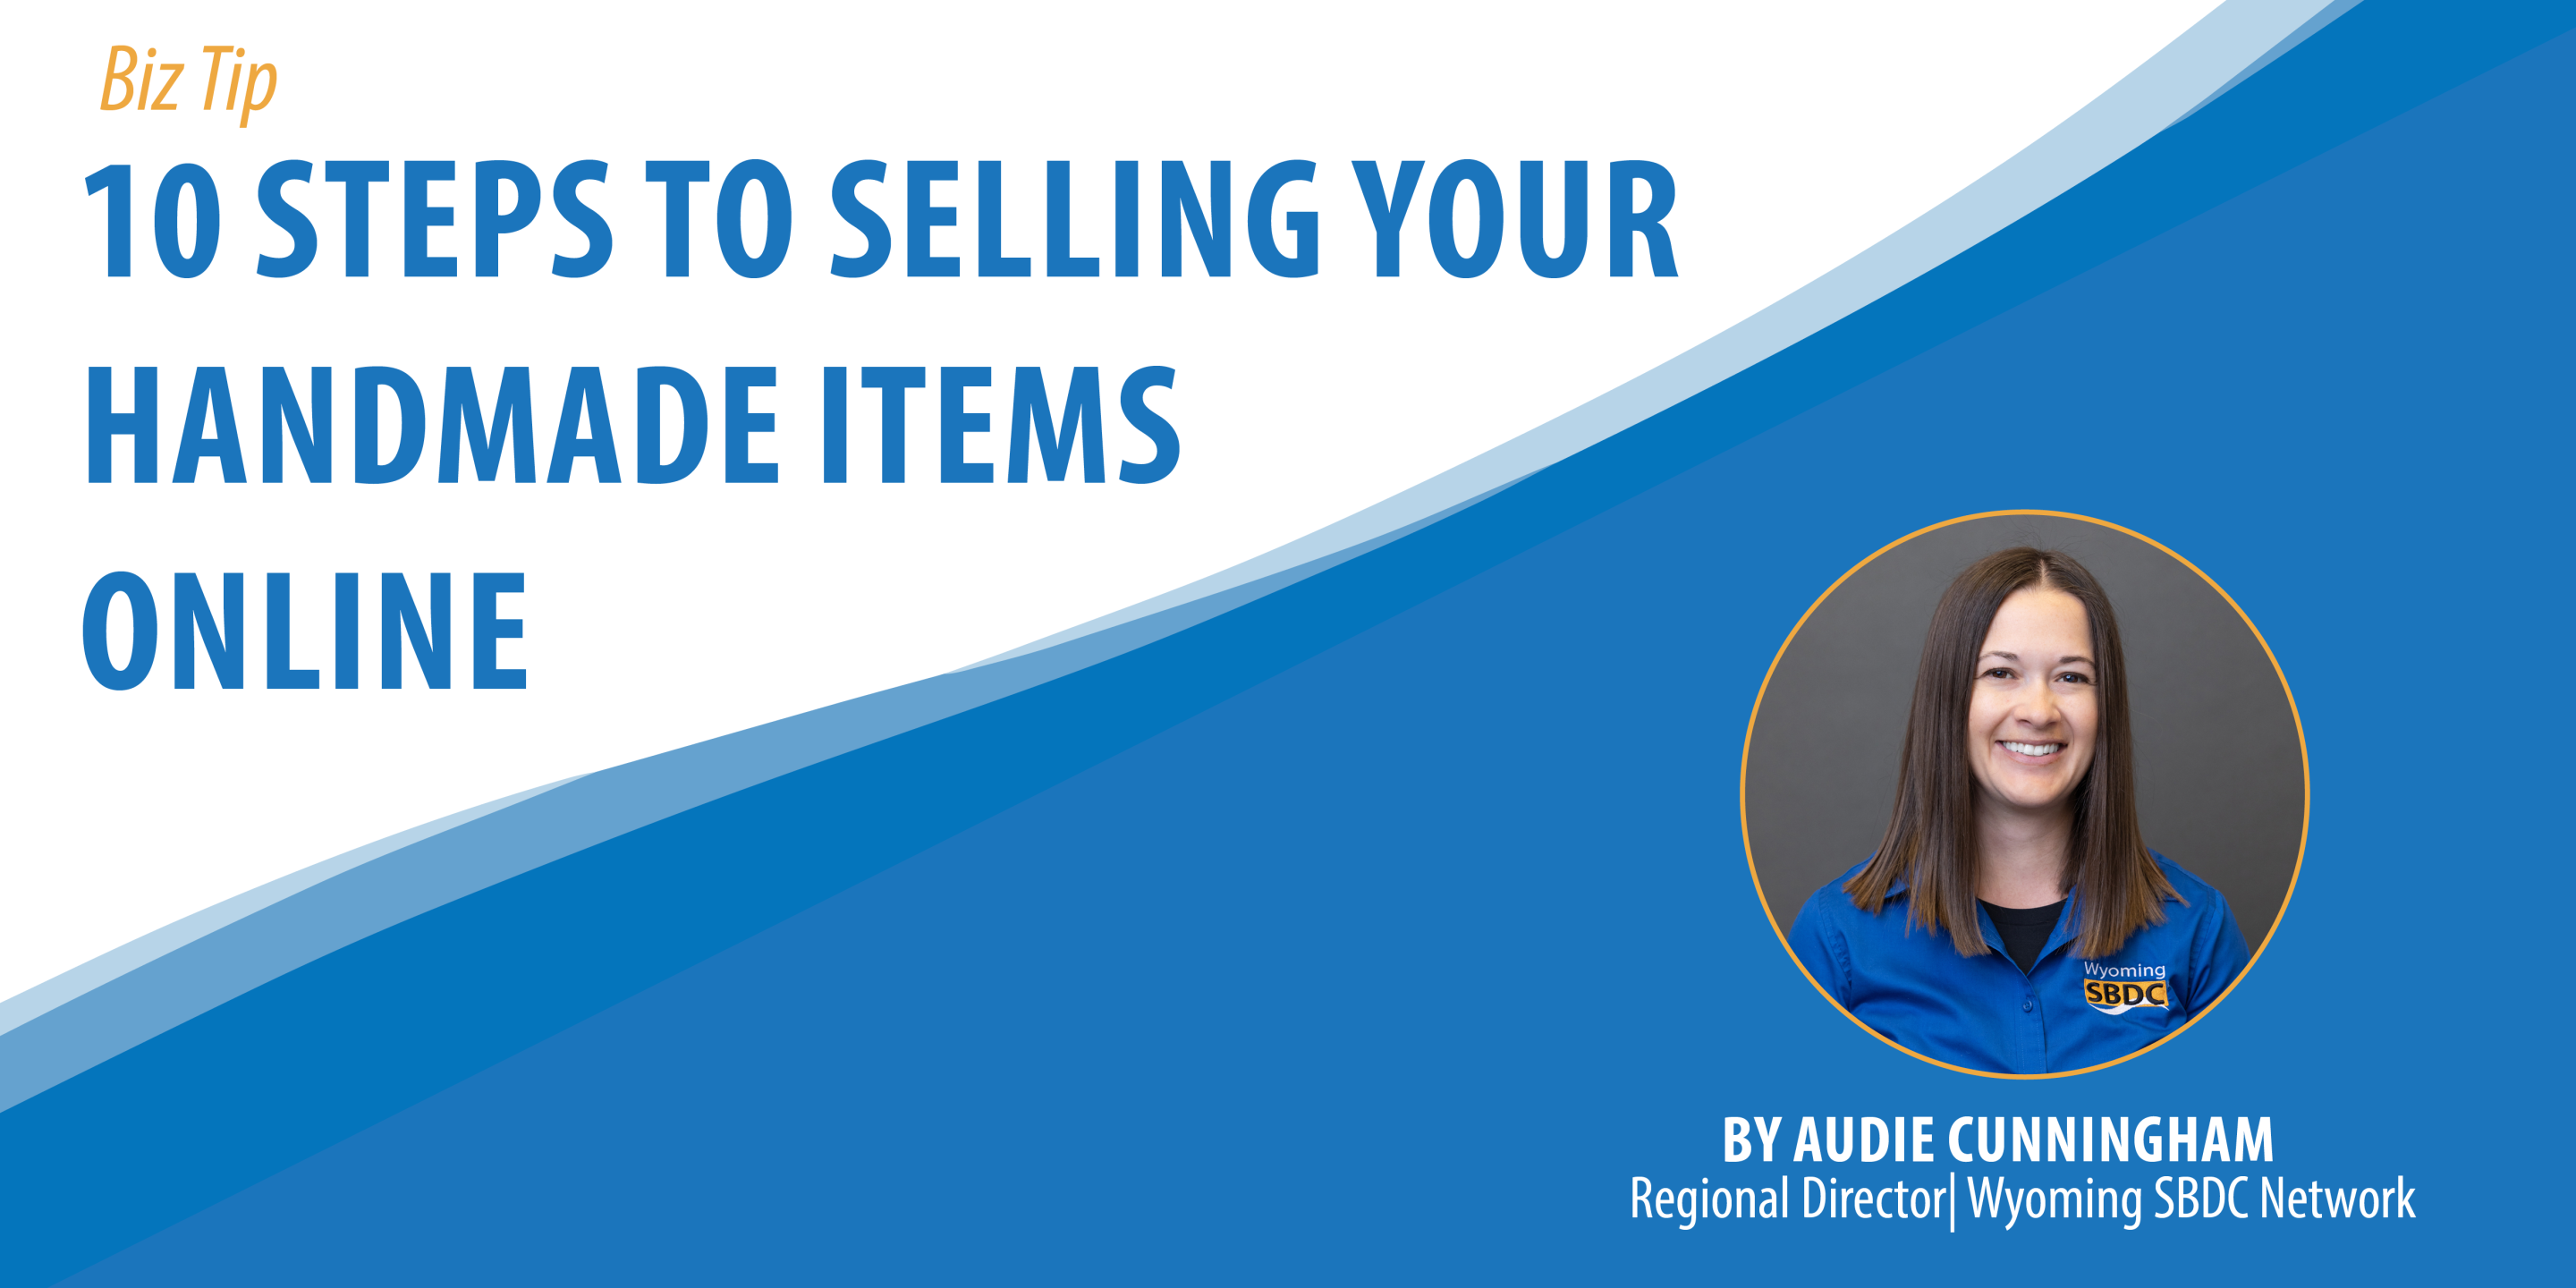 10 Steps to Selling Your Handmade Items Online